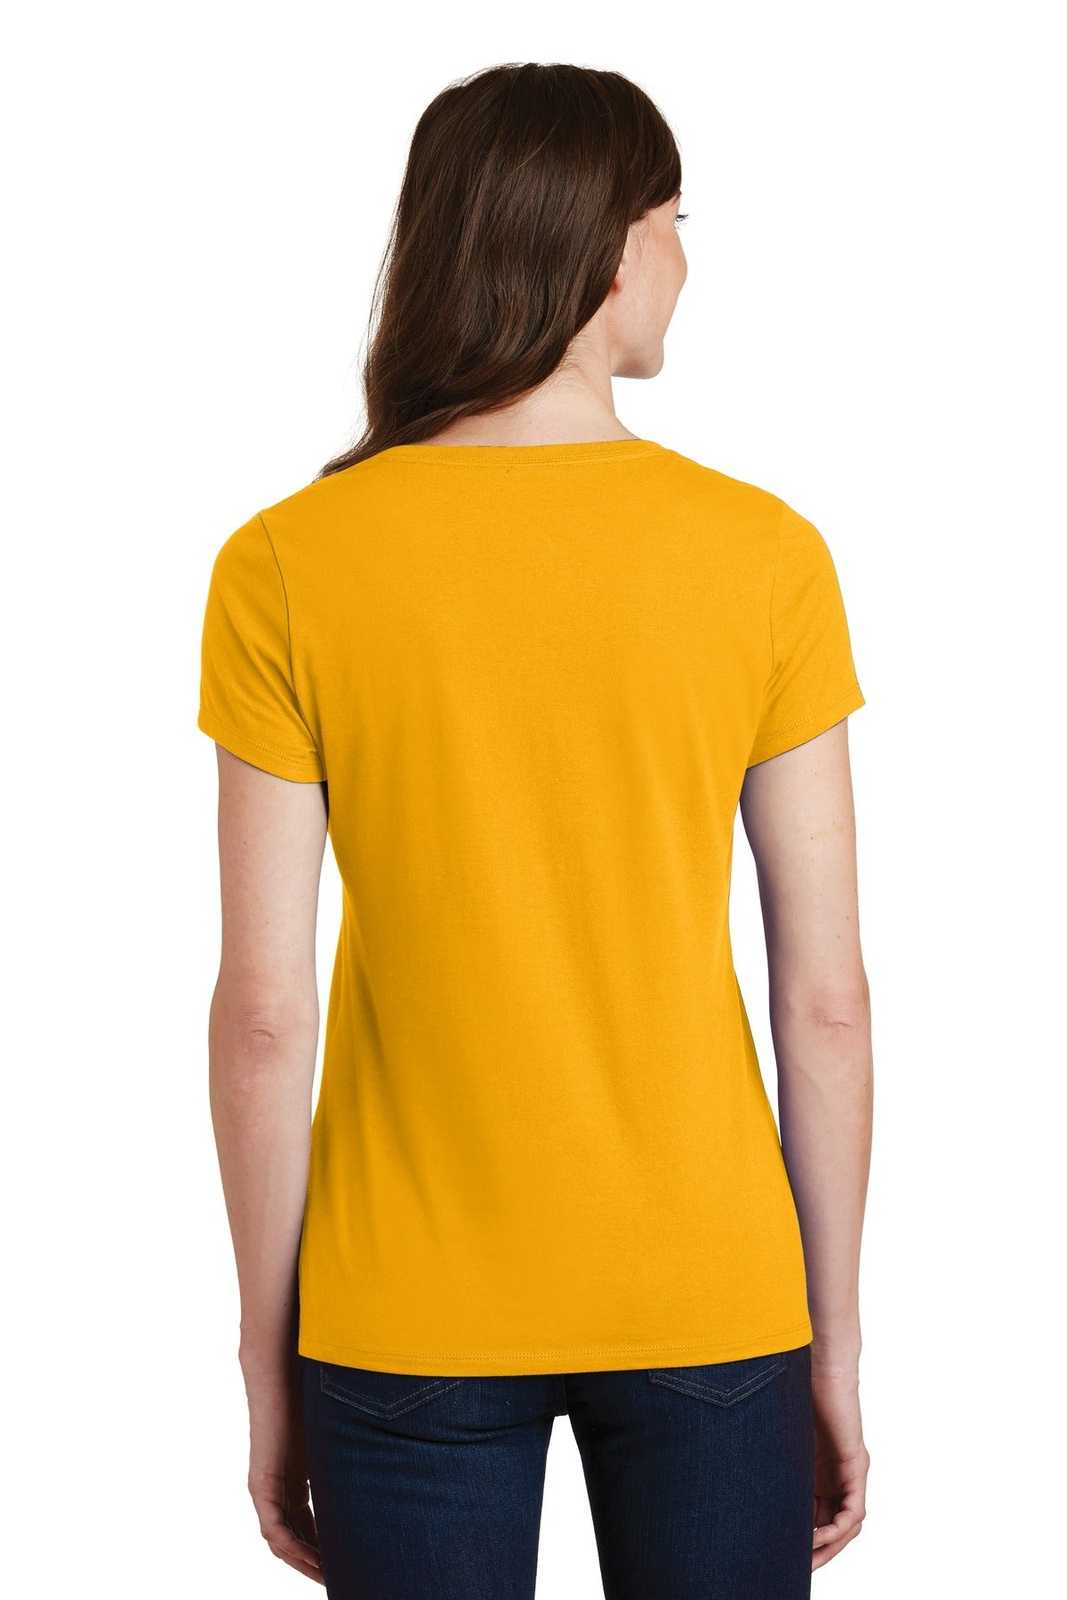 Port & Company LPC450V Ladies Fan Favorite V-Neck Tee - Bright Gold - HIT a Double - 1